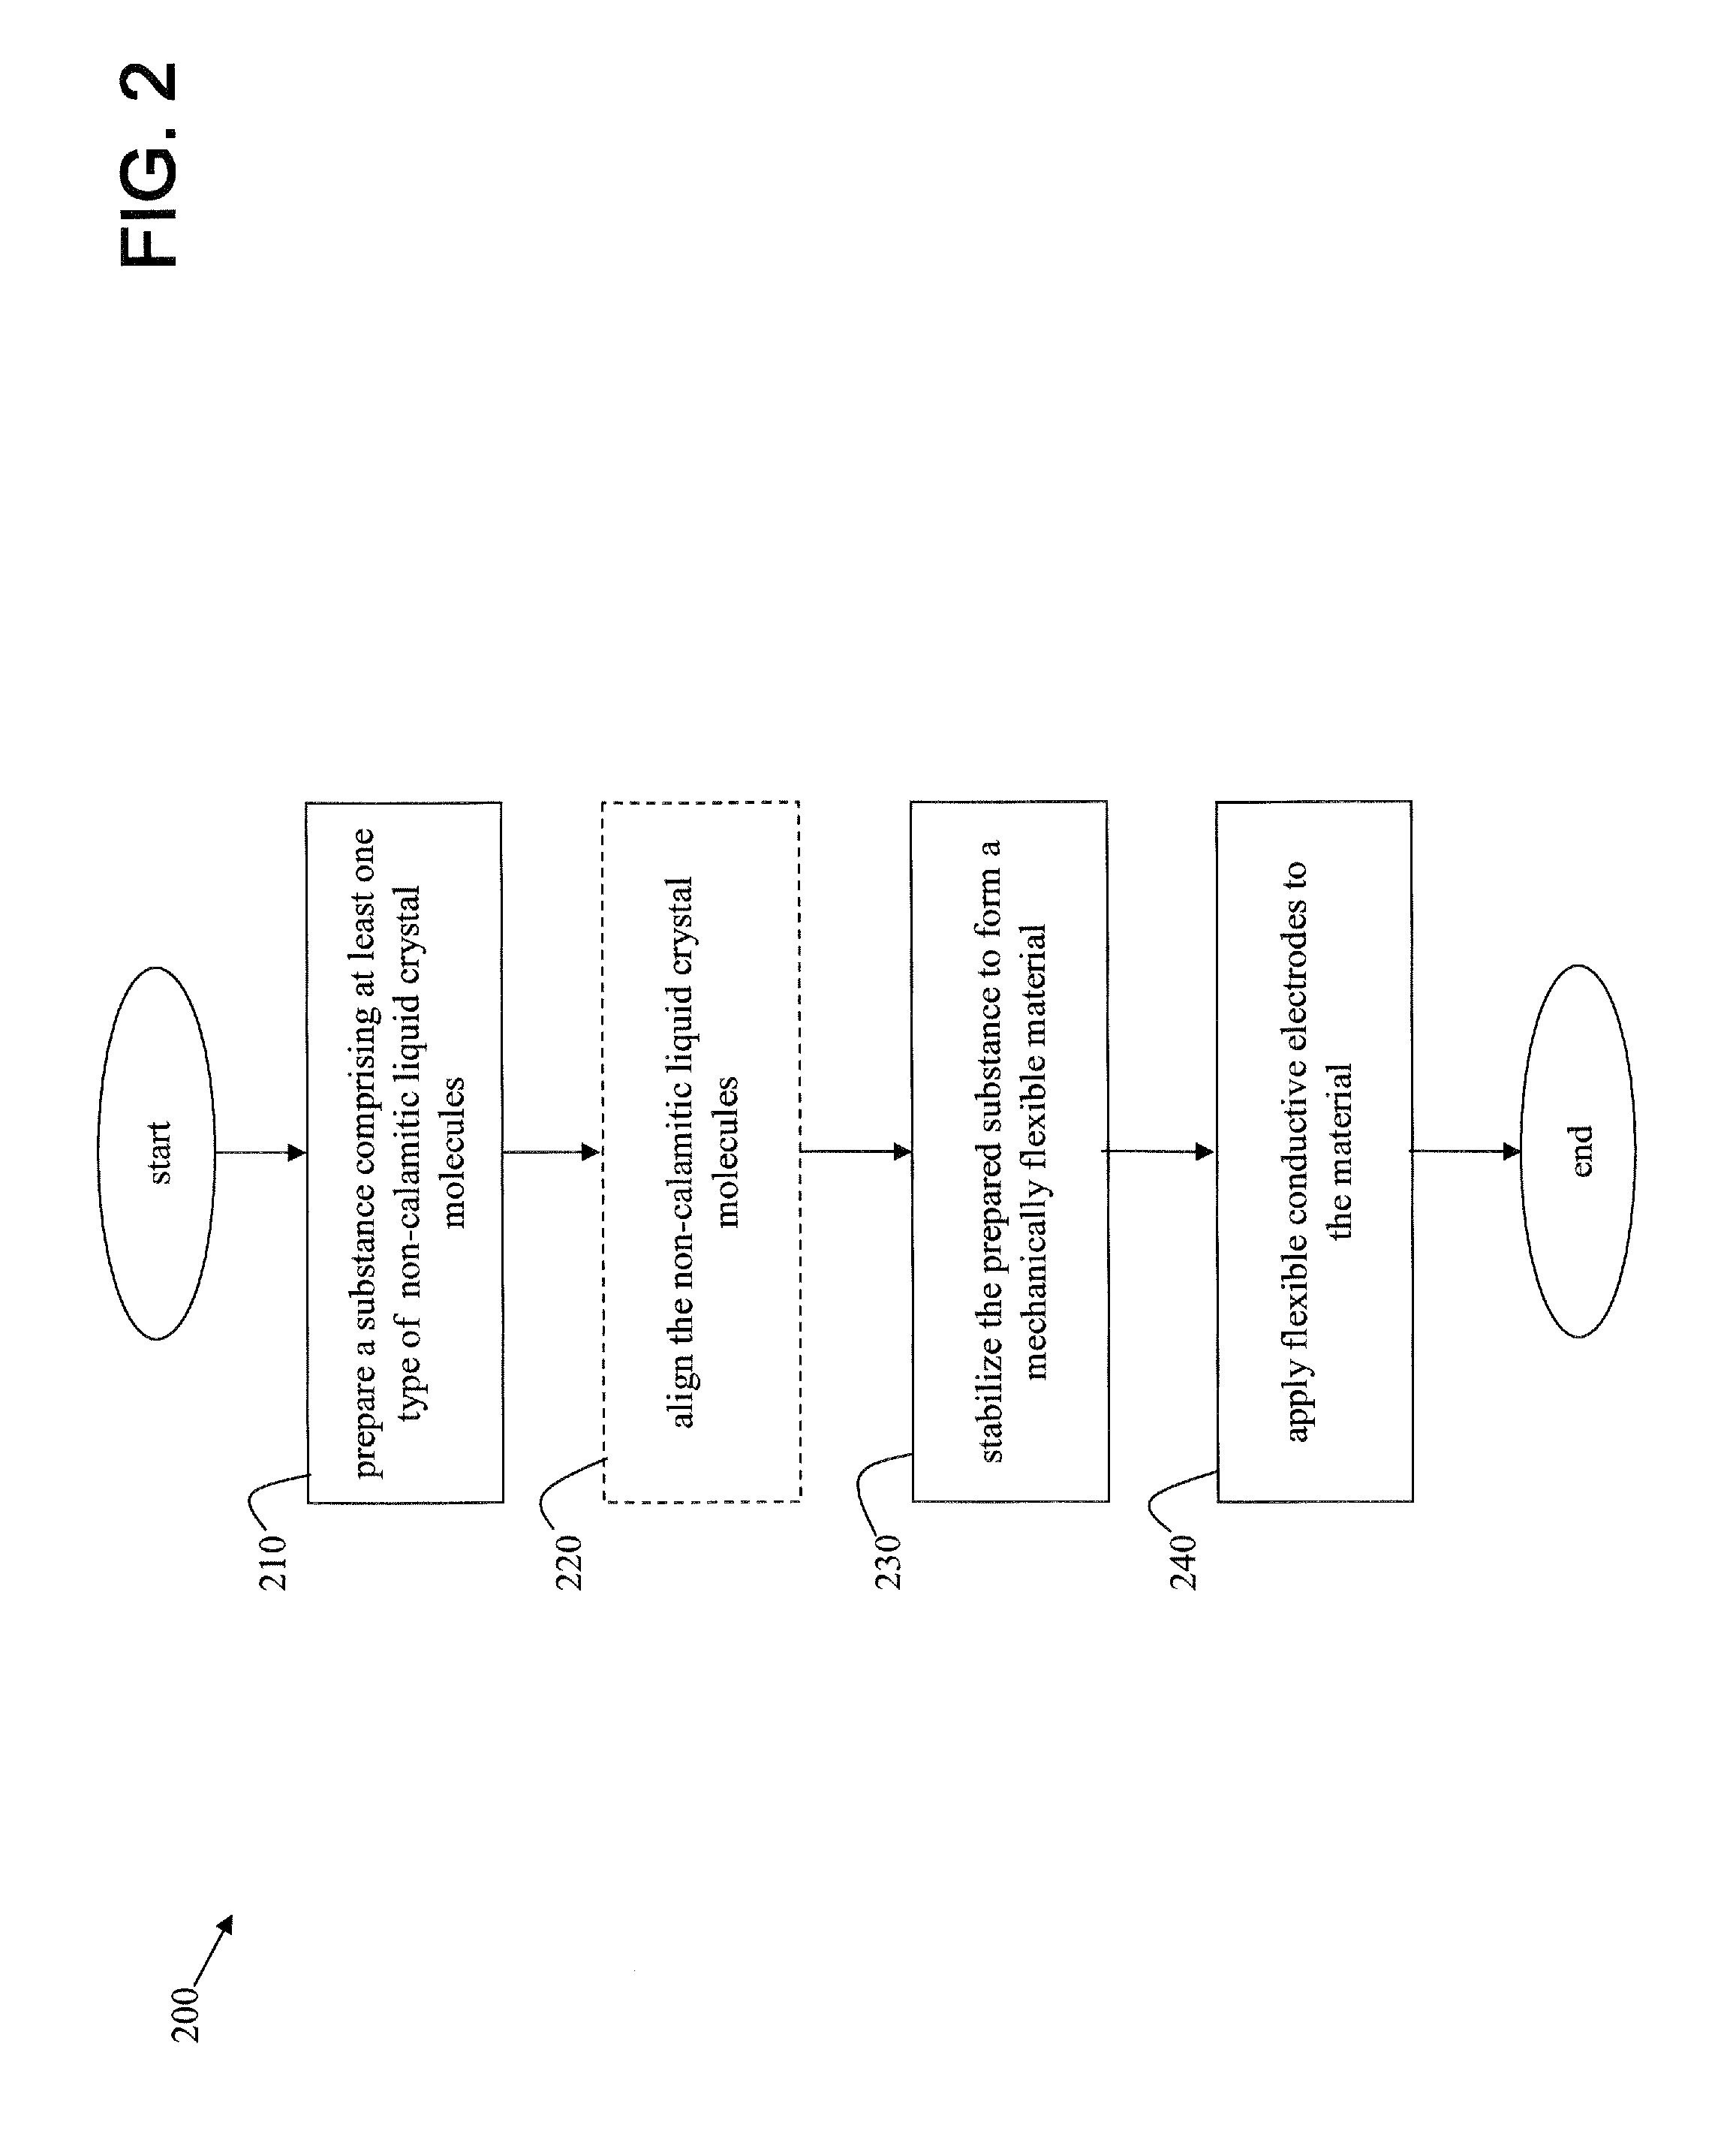 Devices and methods for energy conversion basedon the giant flexoelectric effect in non-calamitic liquid crystals